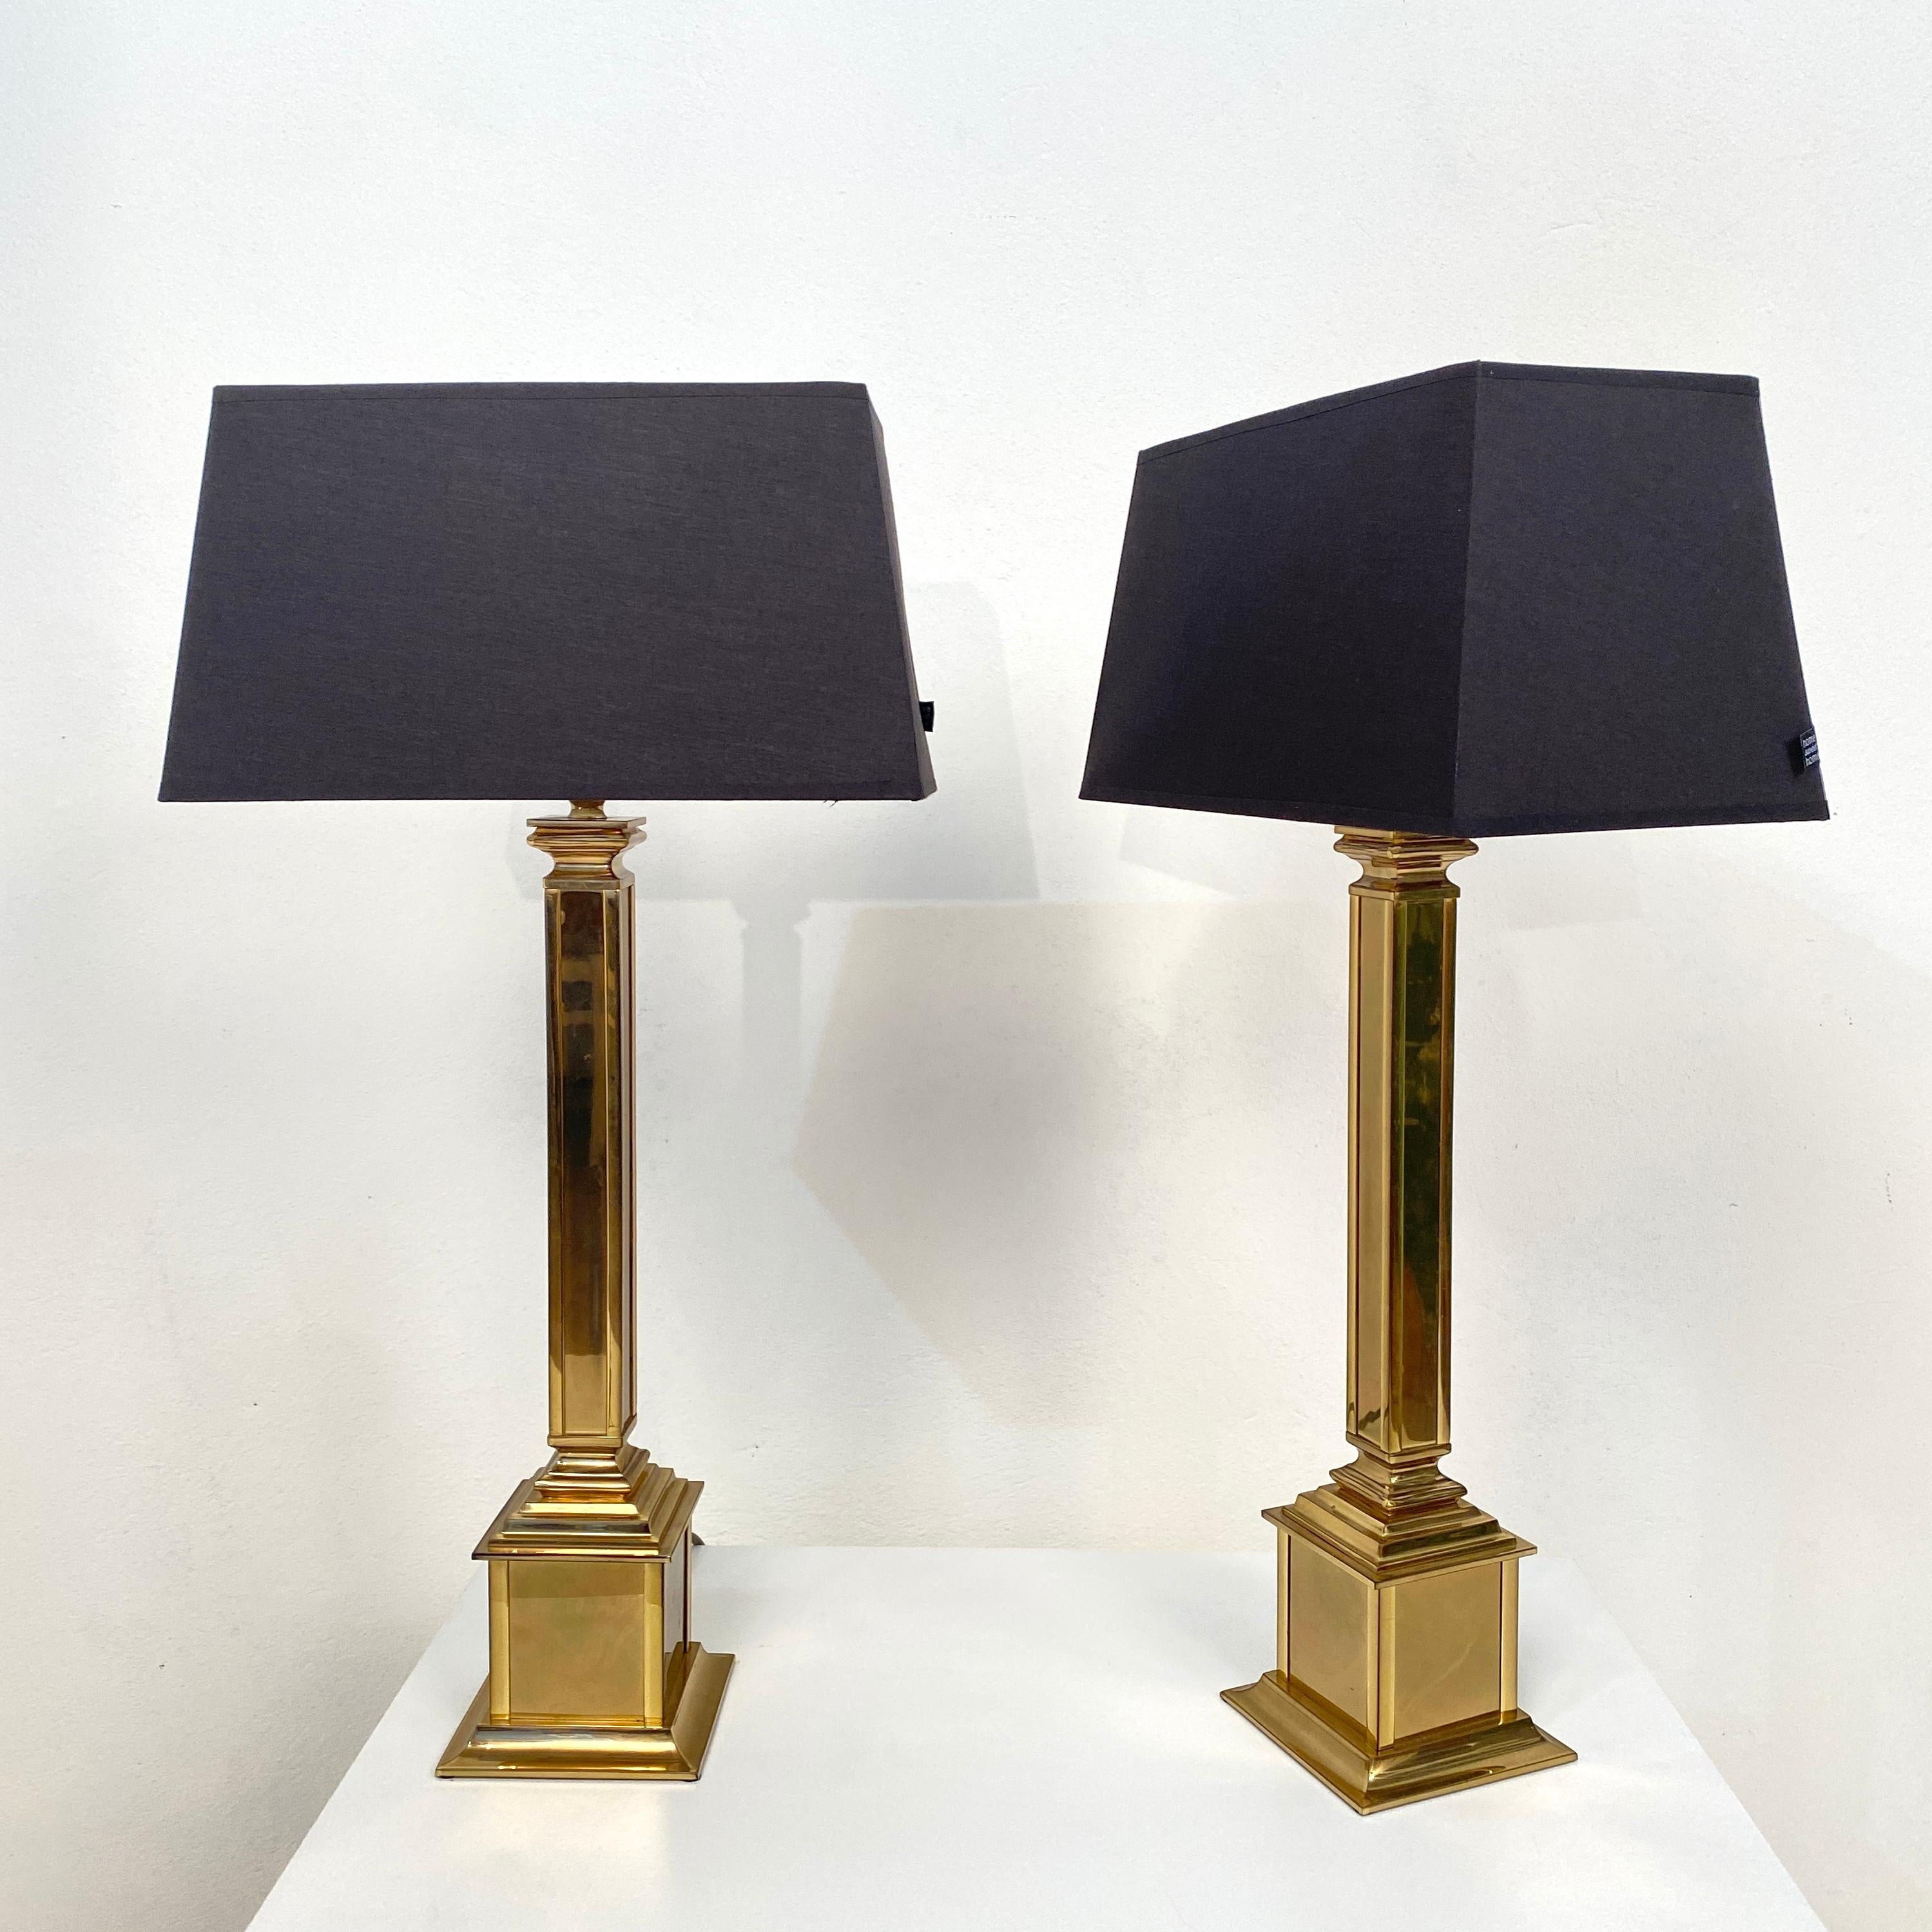 Late 20th Century Pair of German Midcentury Gilded Brass Table Lamps with Black Lamp Shades, 1970